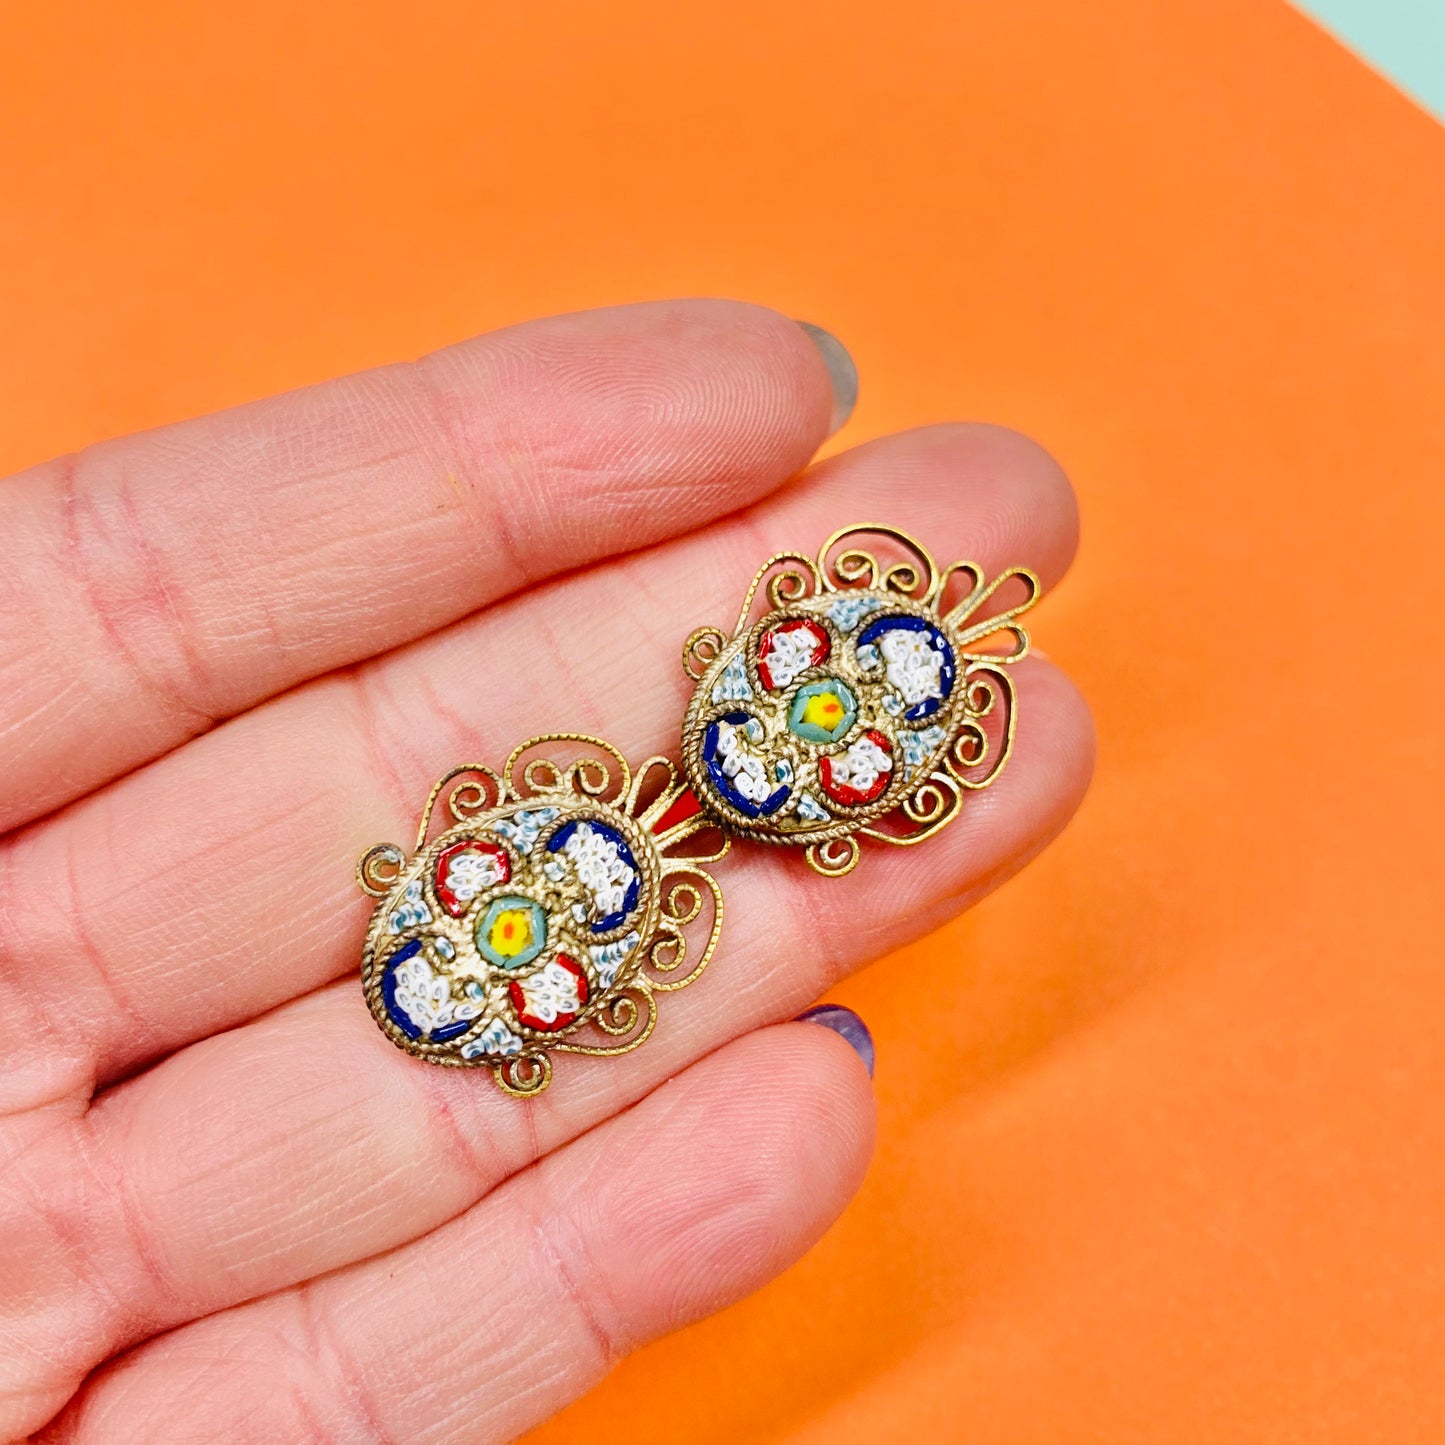 Extremely rare antique filigree brass earrings with millefiori glass